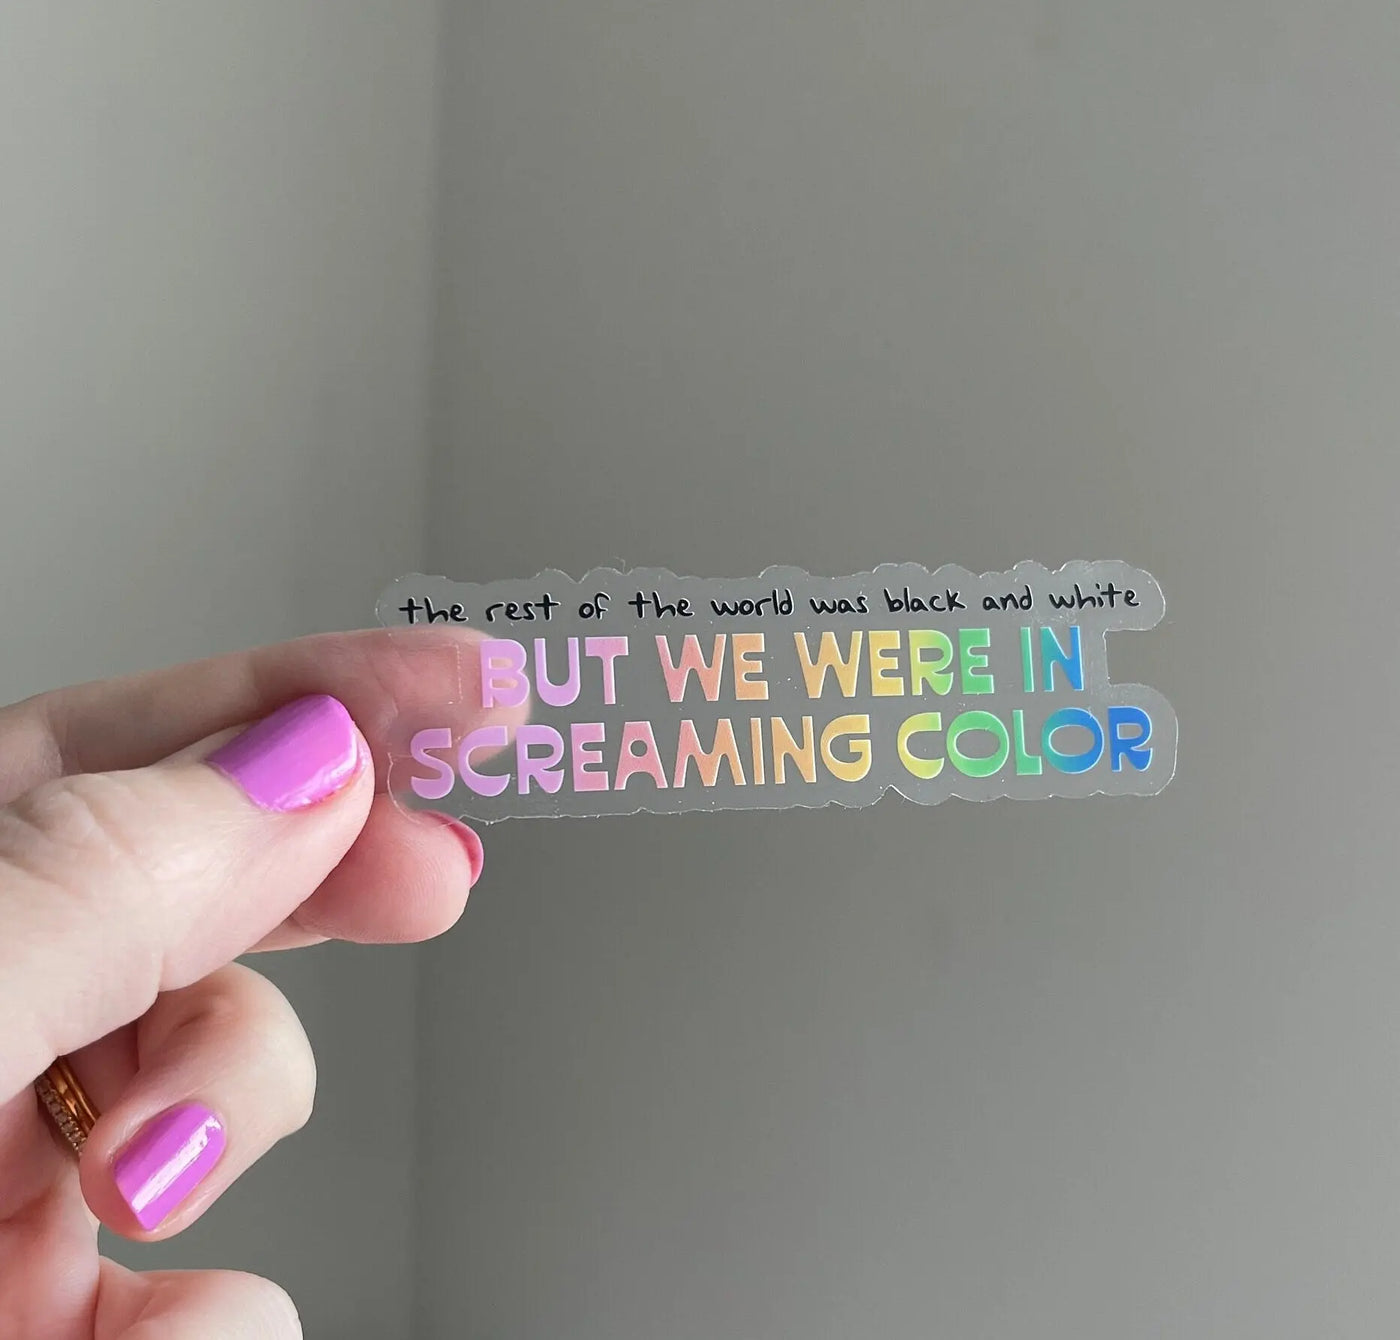 CLEAR Out of the Woods "But We Were in Screaming Color" sticker MangoIllustrated